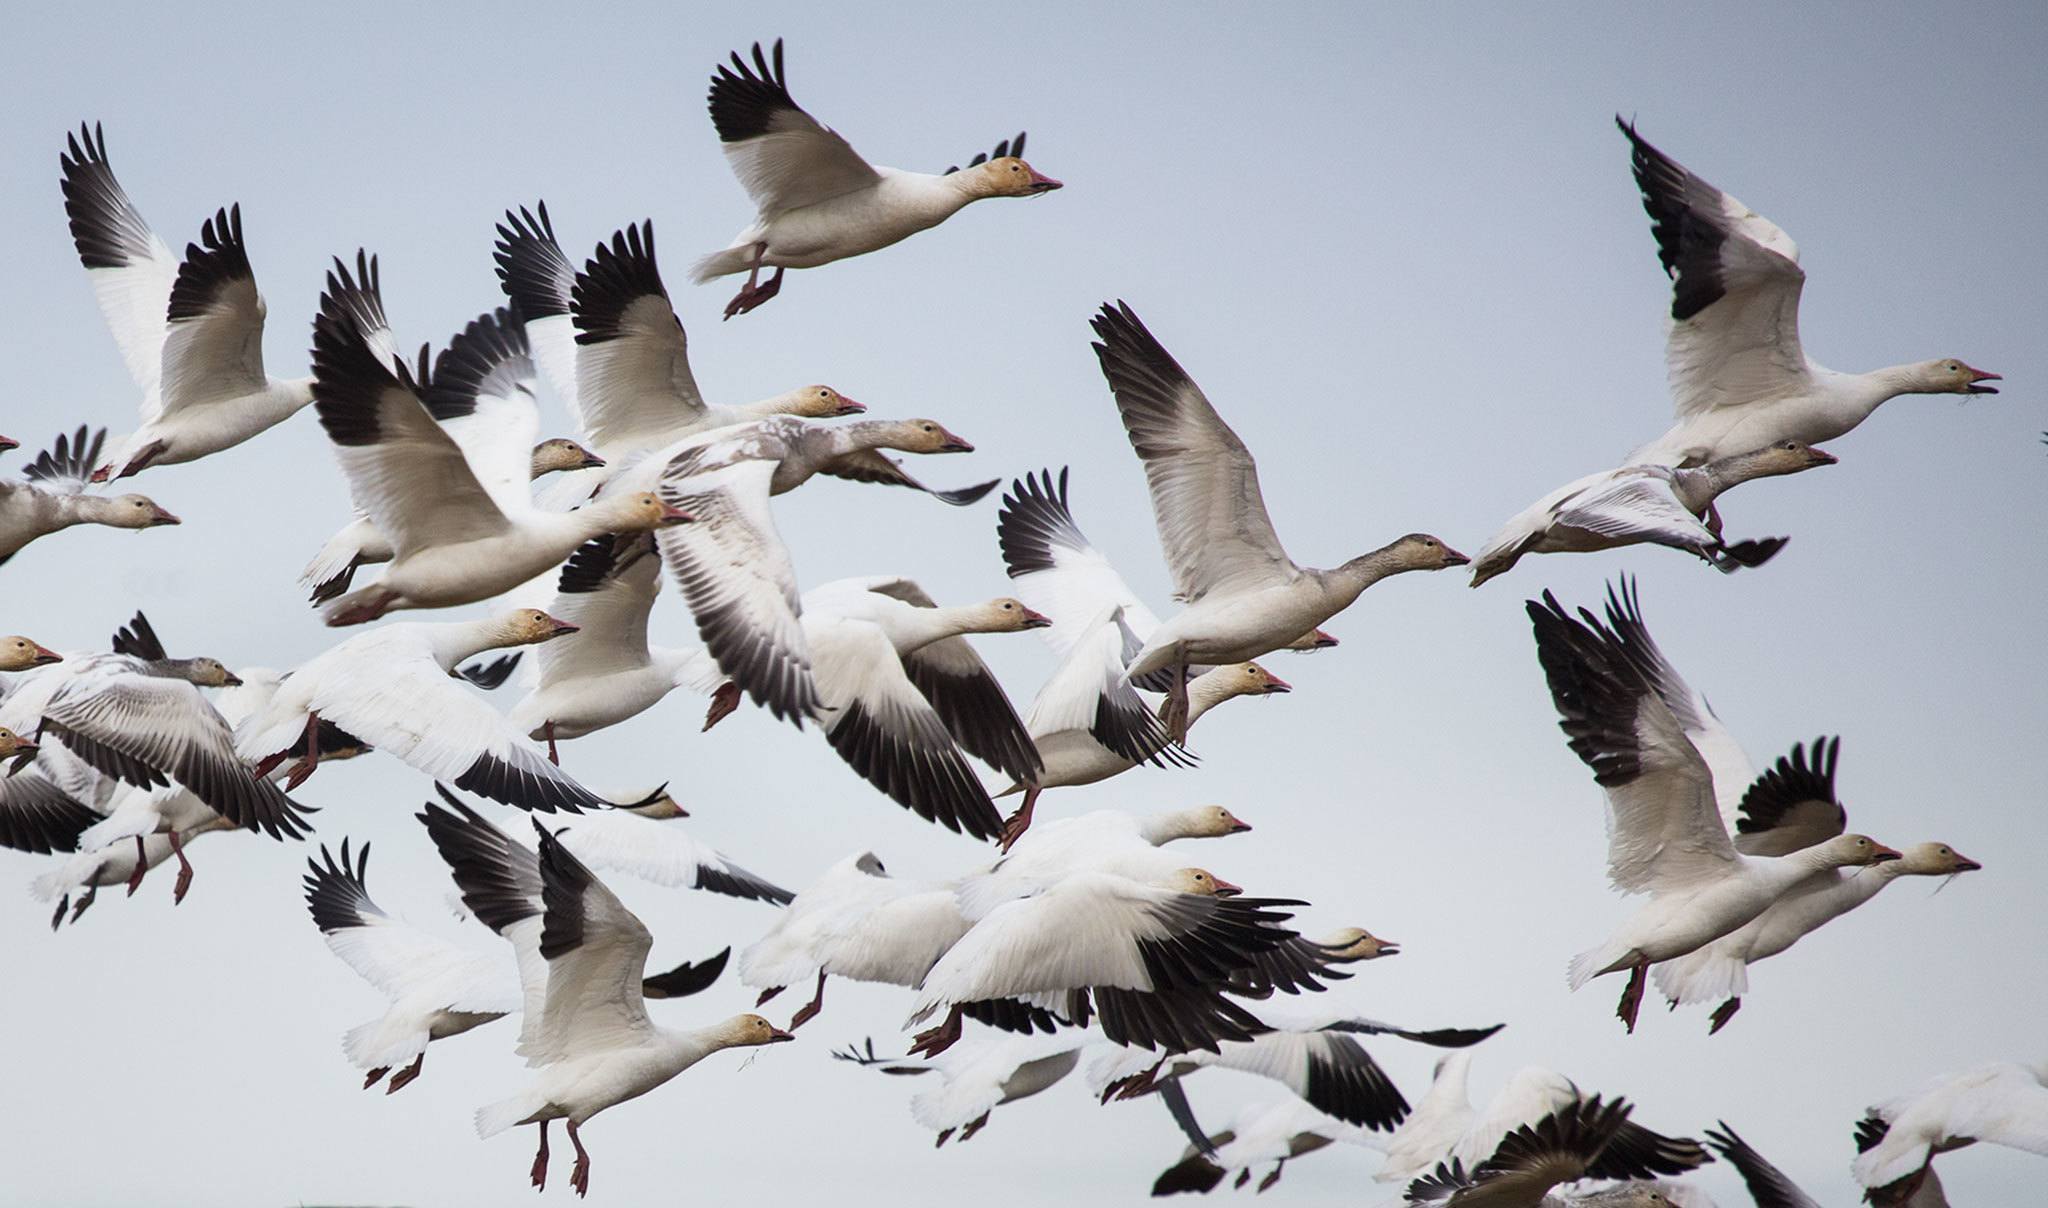 This year's Snow Goose Festival is canceled, but geese remain ...